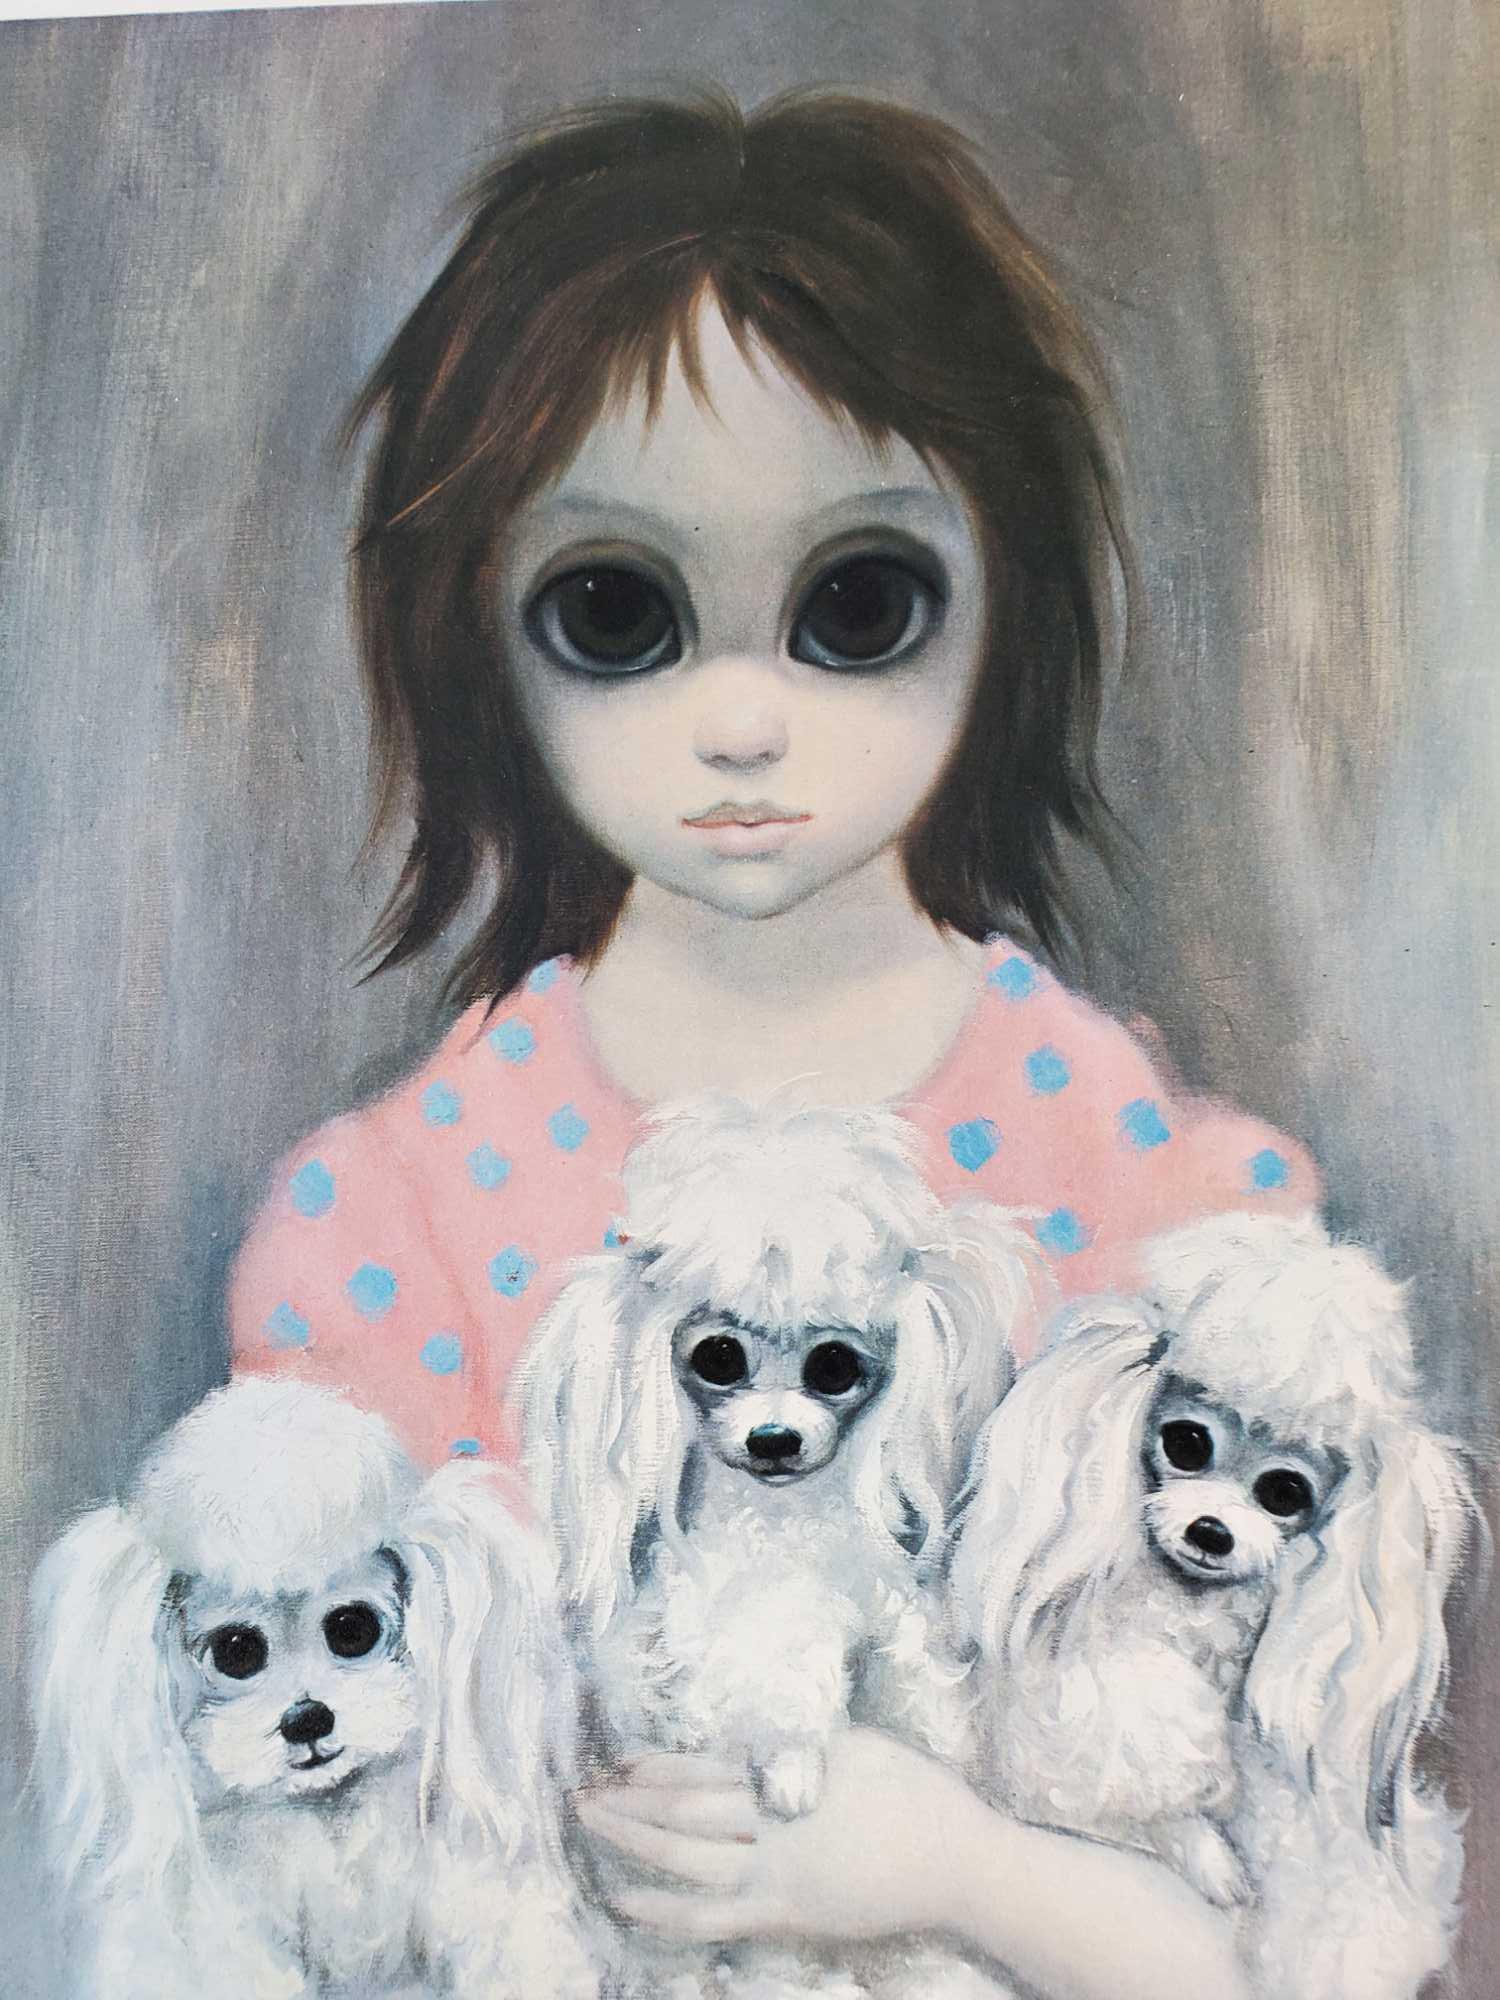 4 Original 1960s Big Eyes Children Lithographic Prints by Margaret and Walter Keane